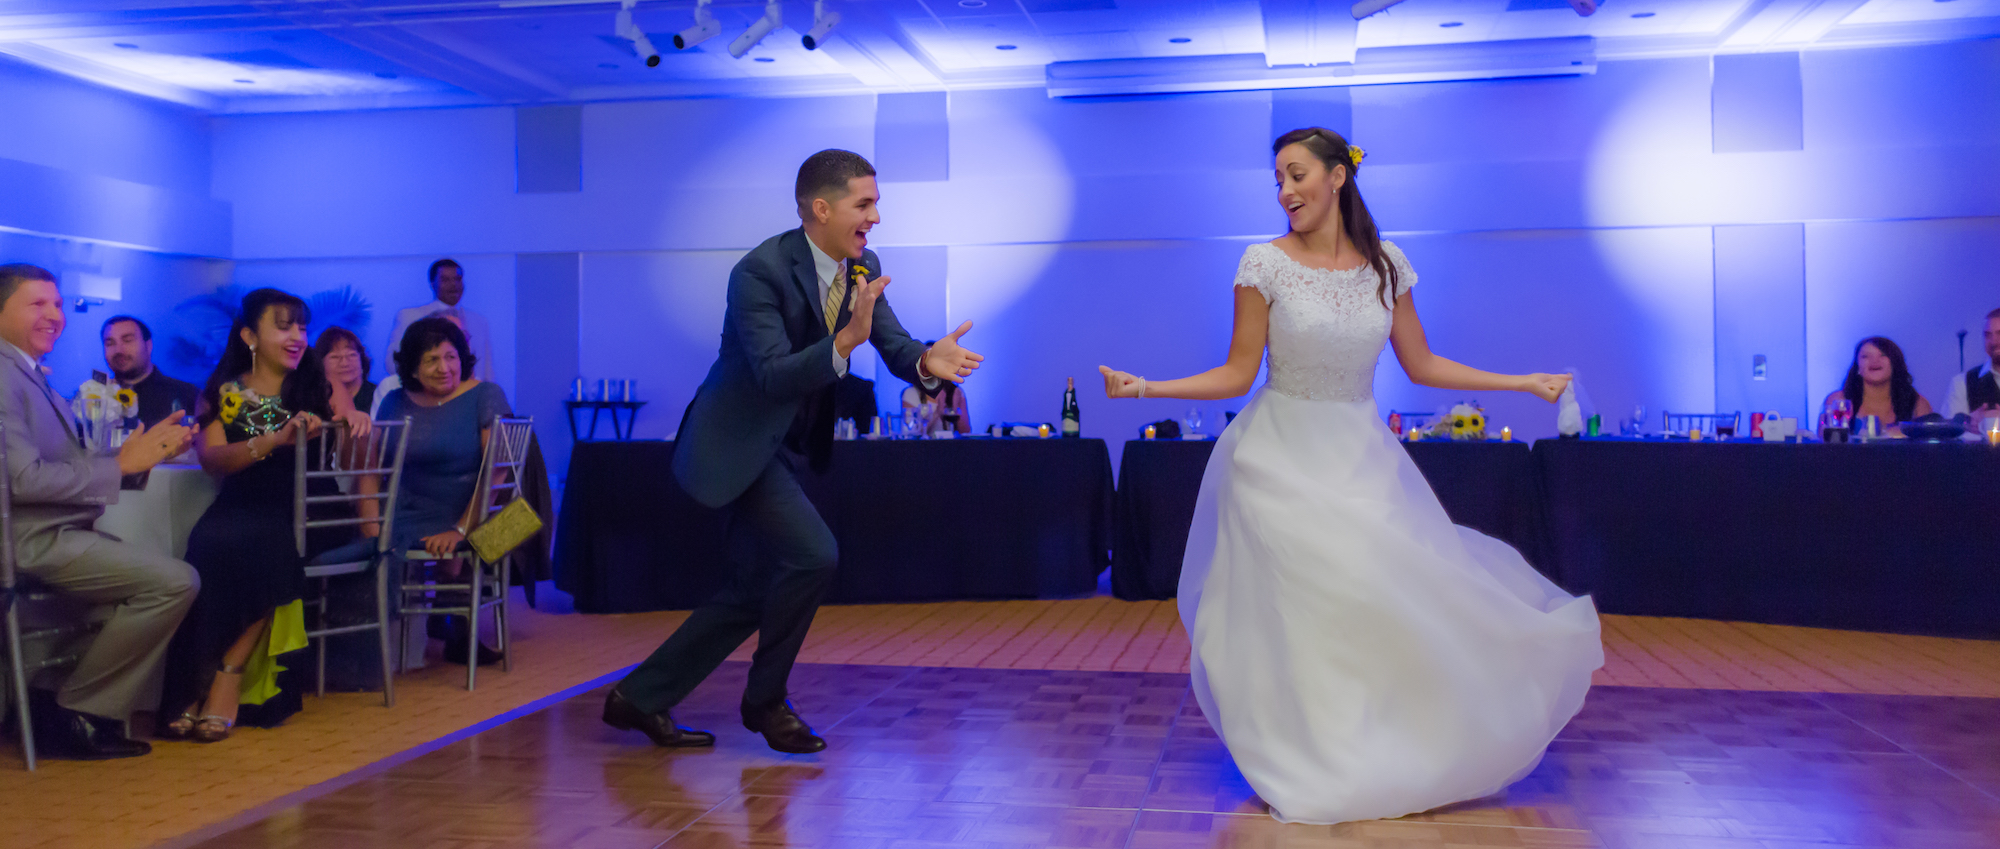 Bride and groom dancing during the wedding reception by Alfredo Valentine Couture Bridal Photography Alfredo Valentine